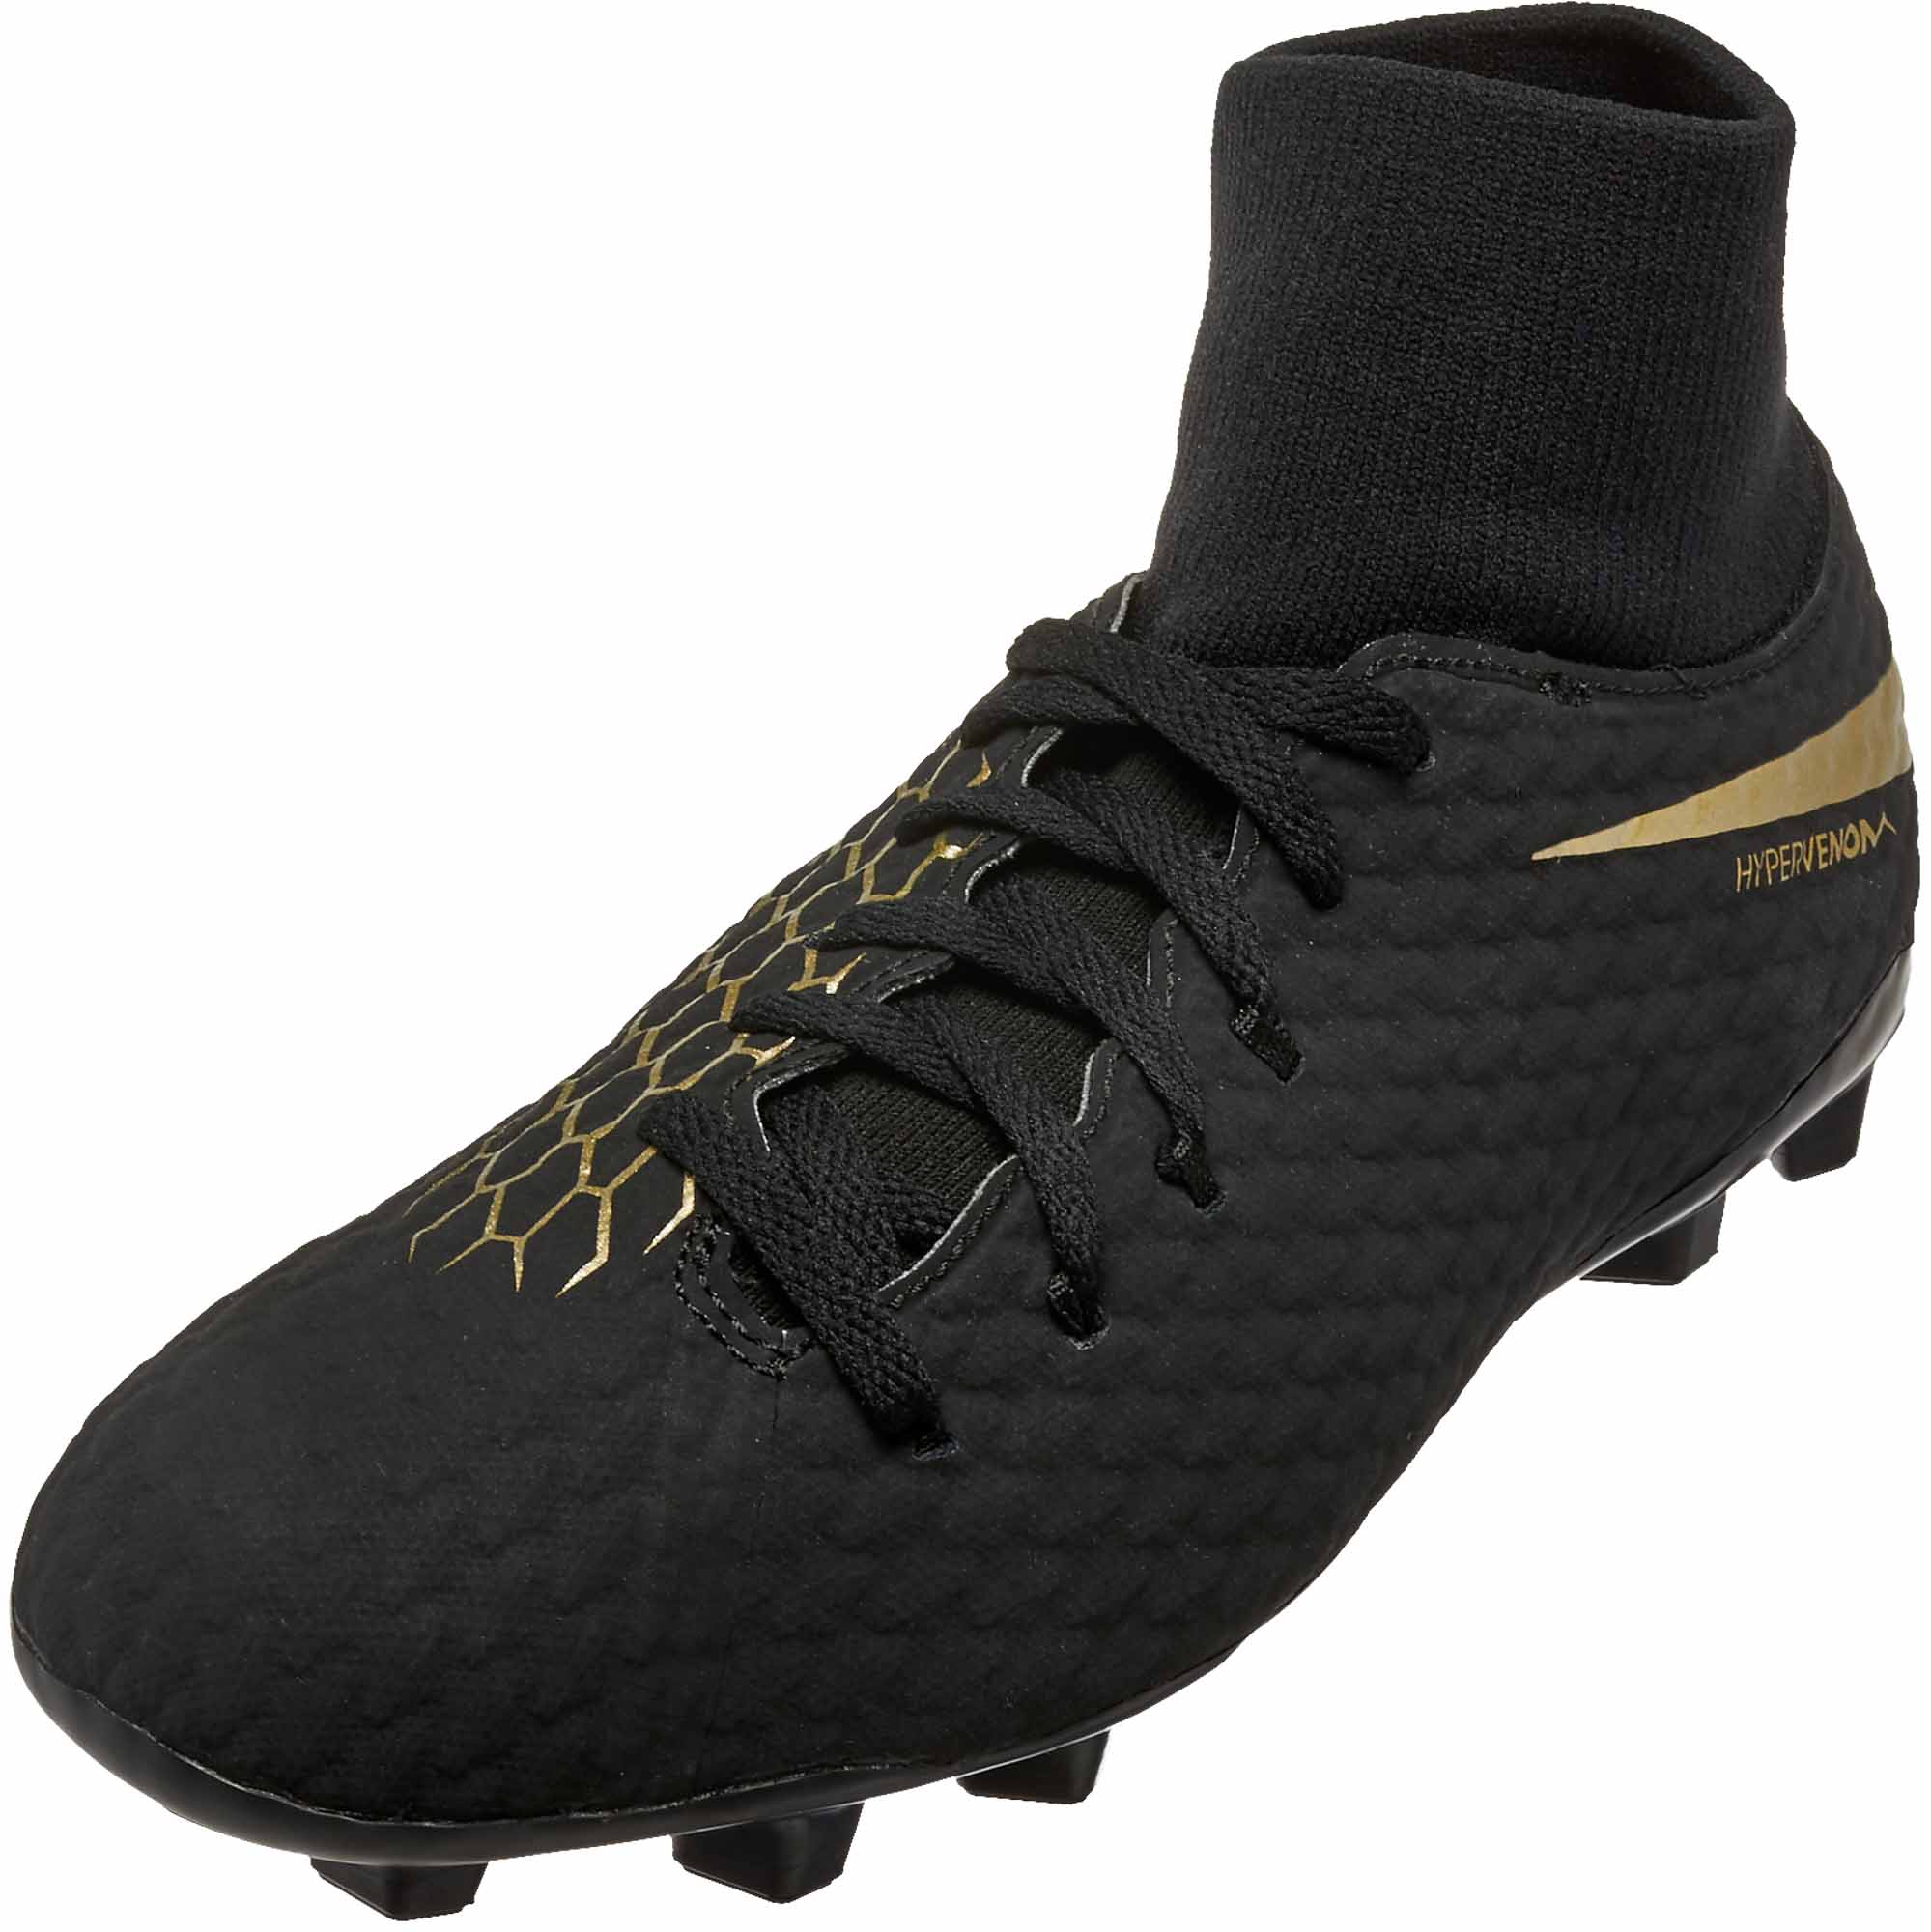 gold nike youth football cleats